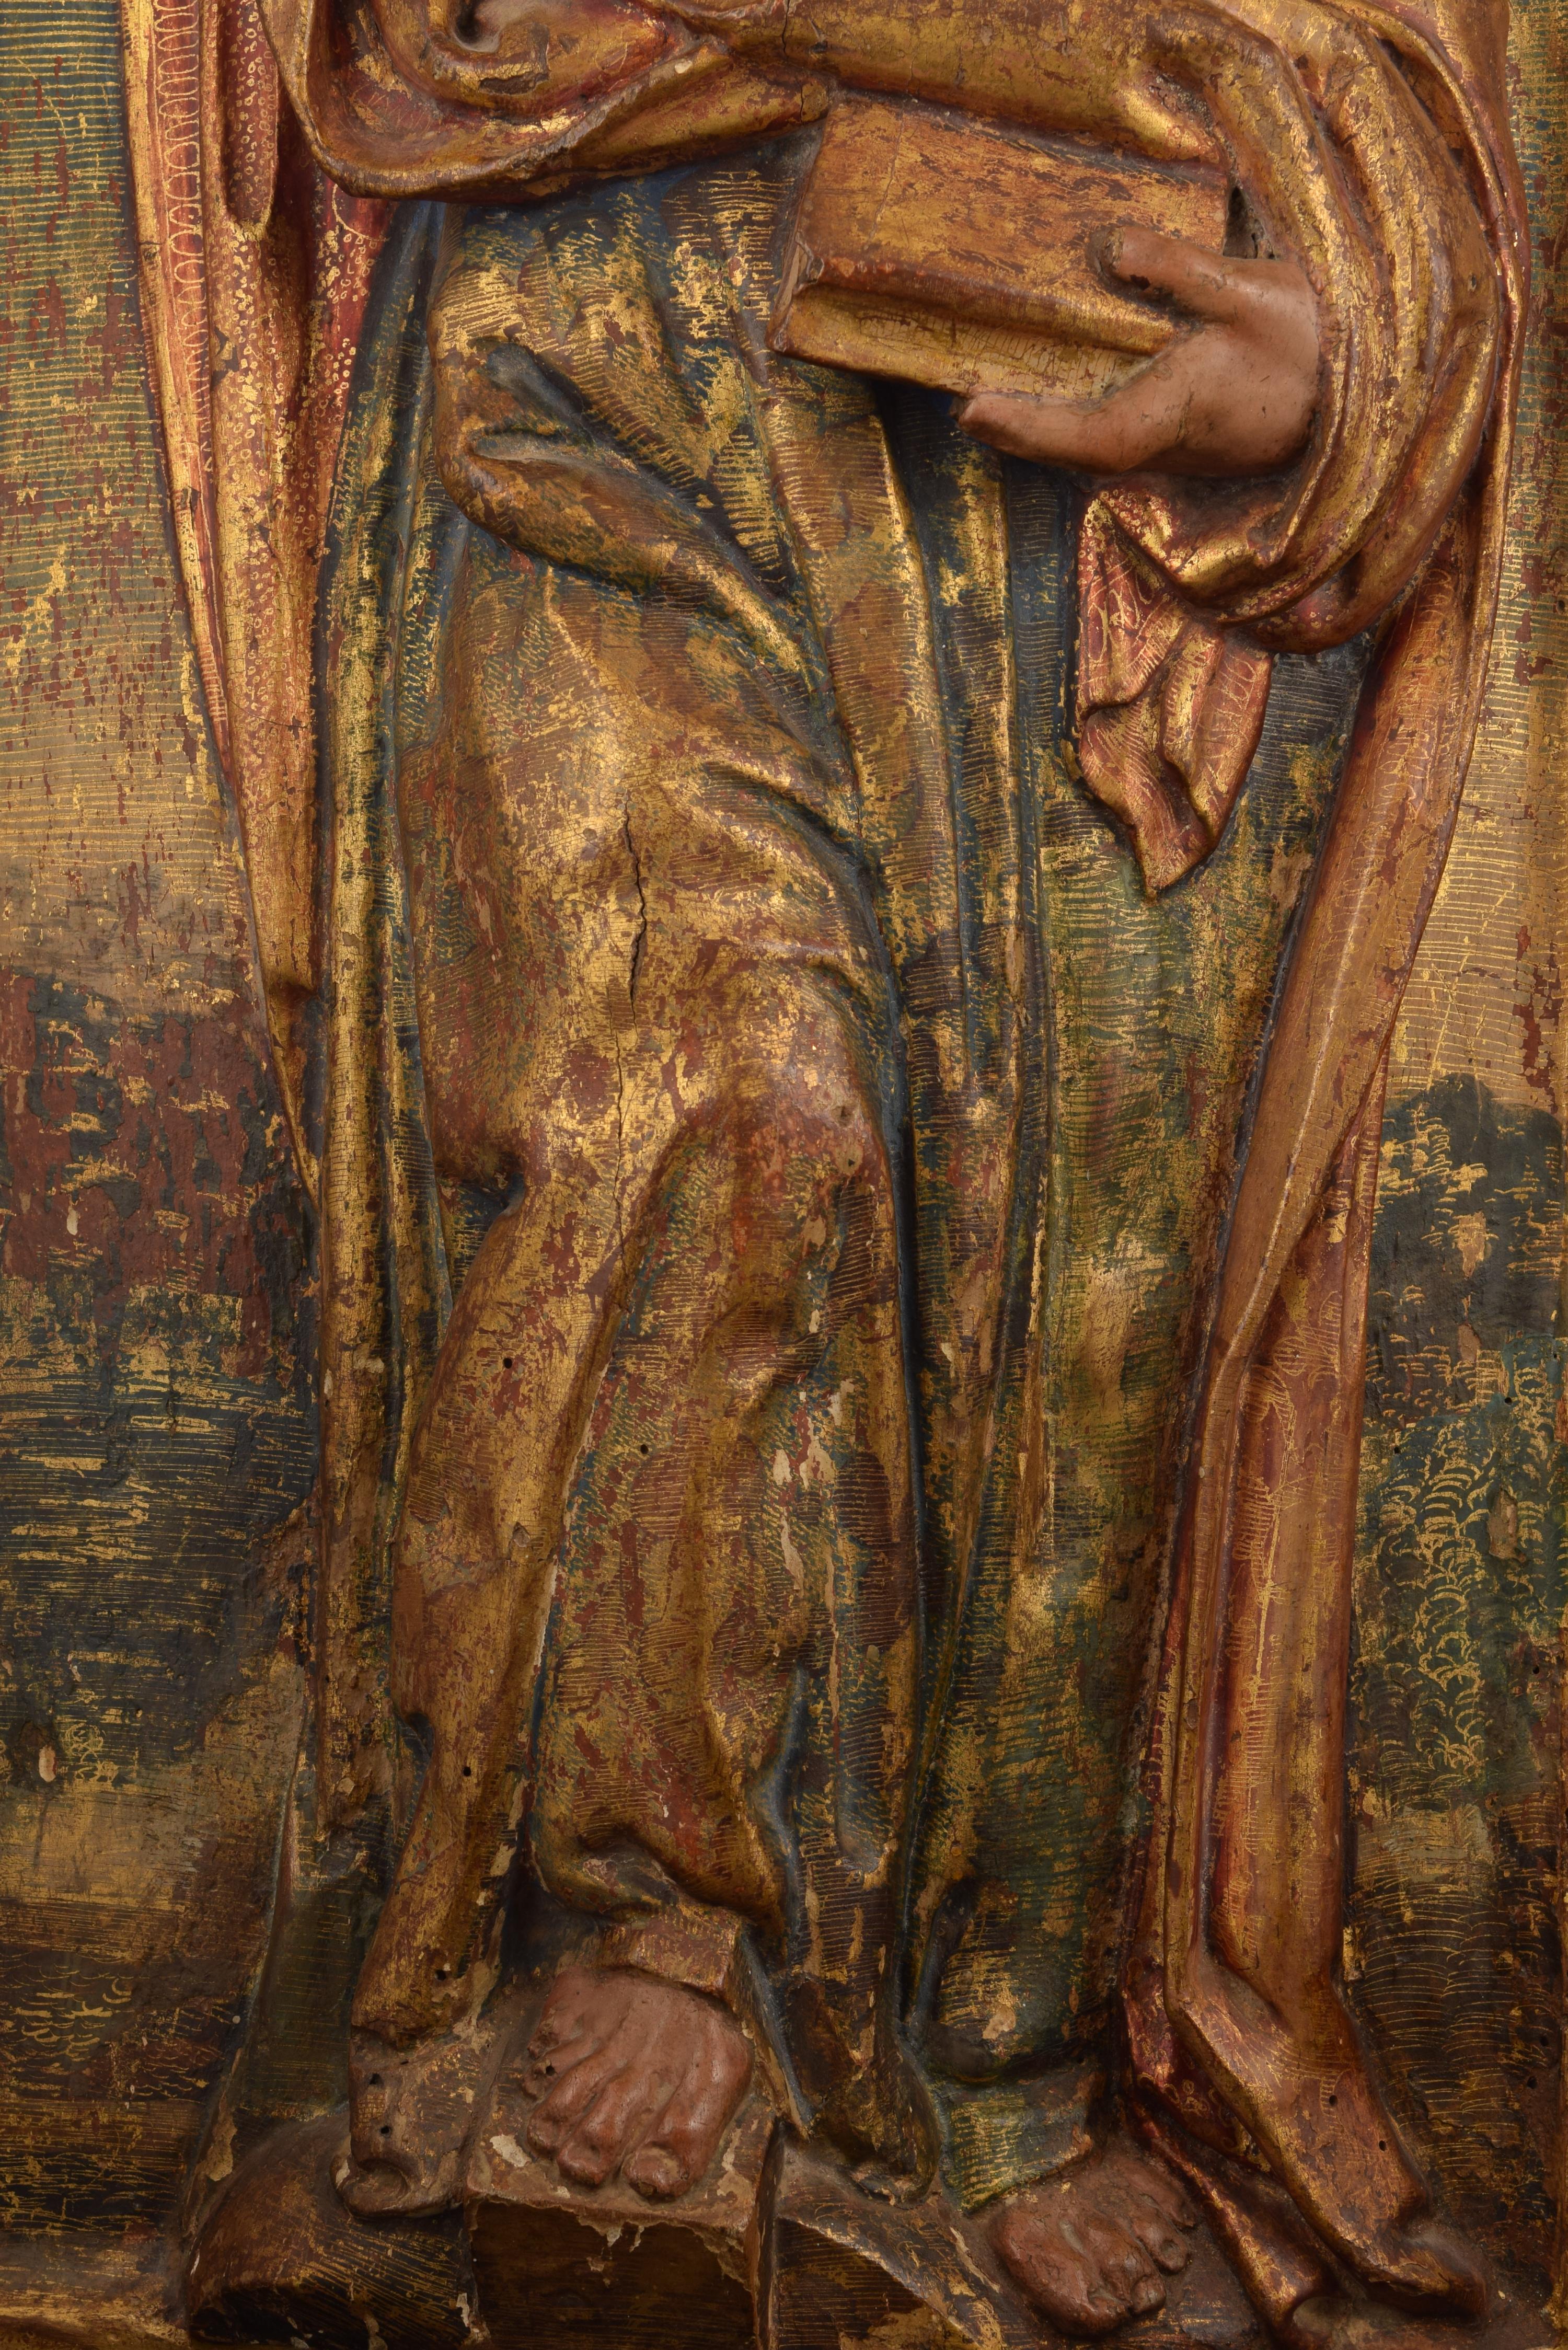 18th Century and Earlier “Saint Peter” and “Saint Paul”, Polychromed Wood Relief, Spain, 16th Century